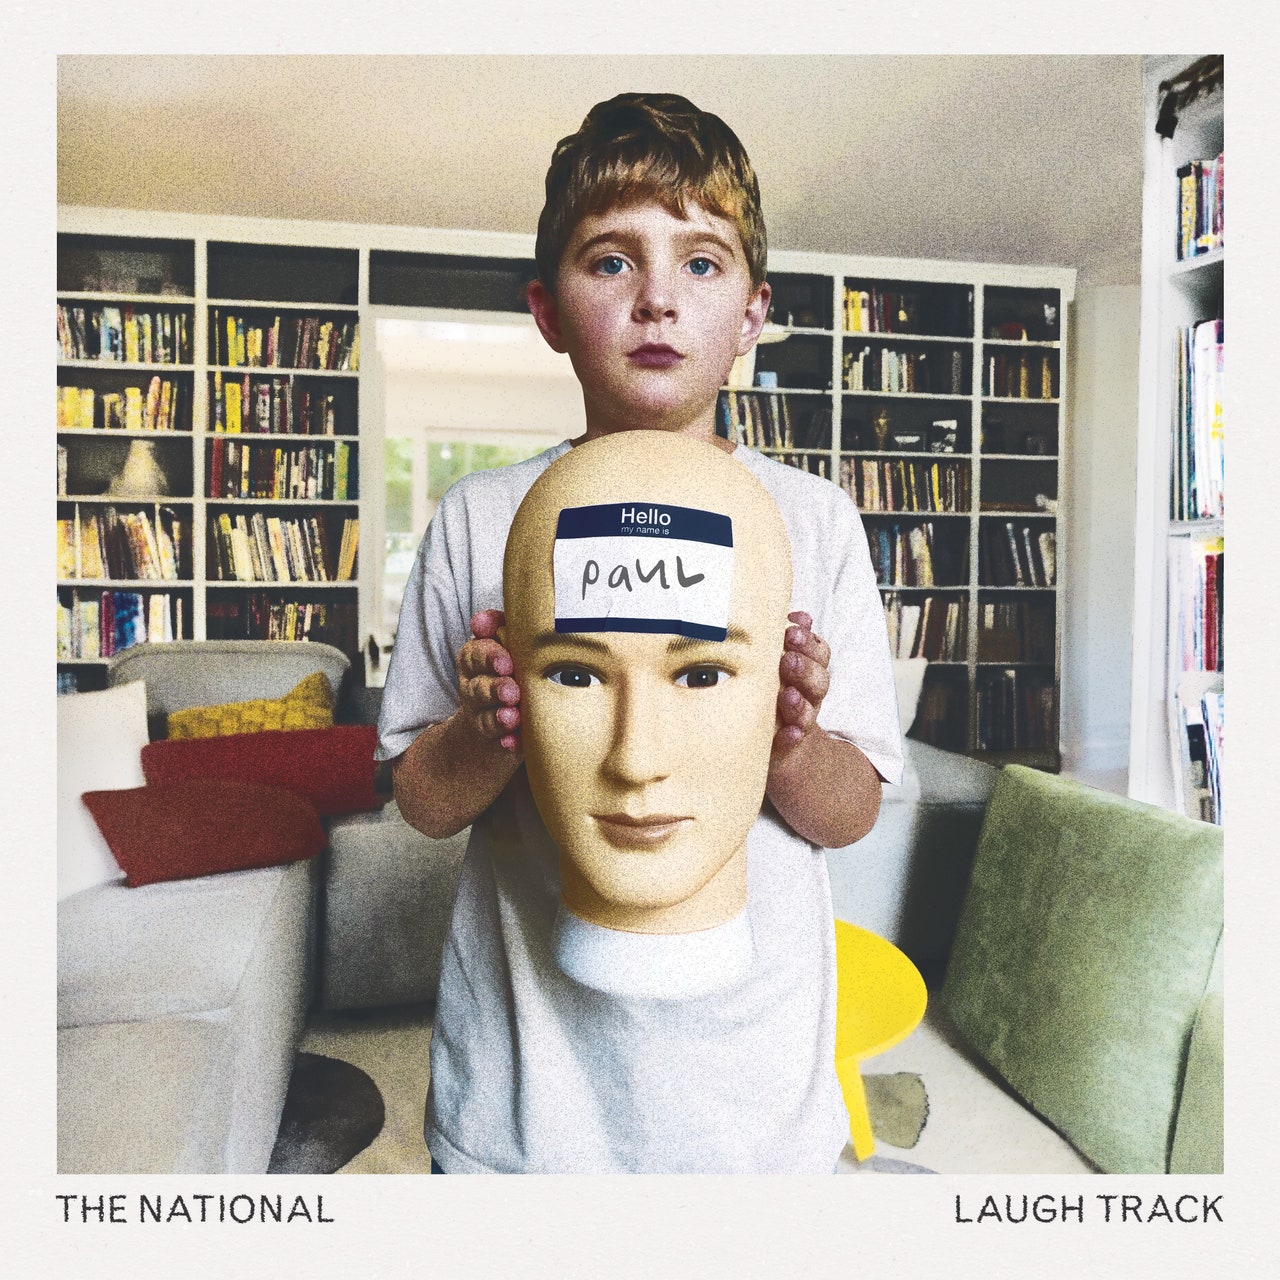 Cover of Laugh Track by The National